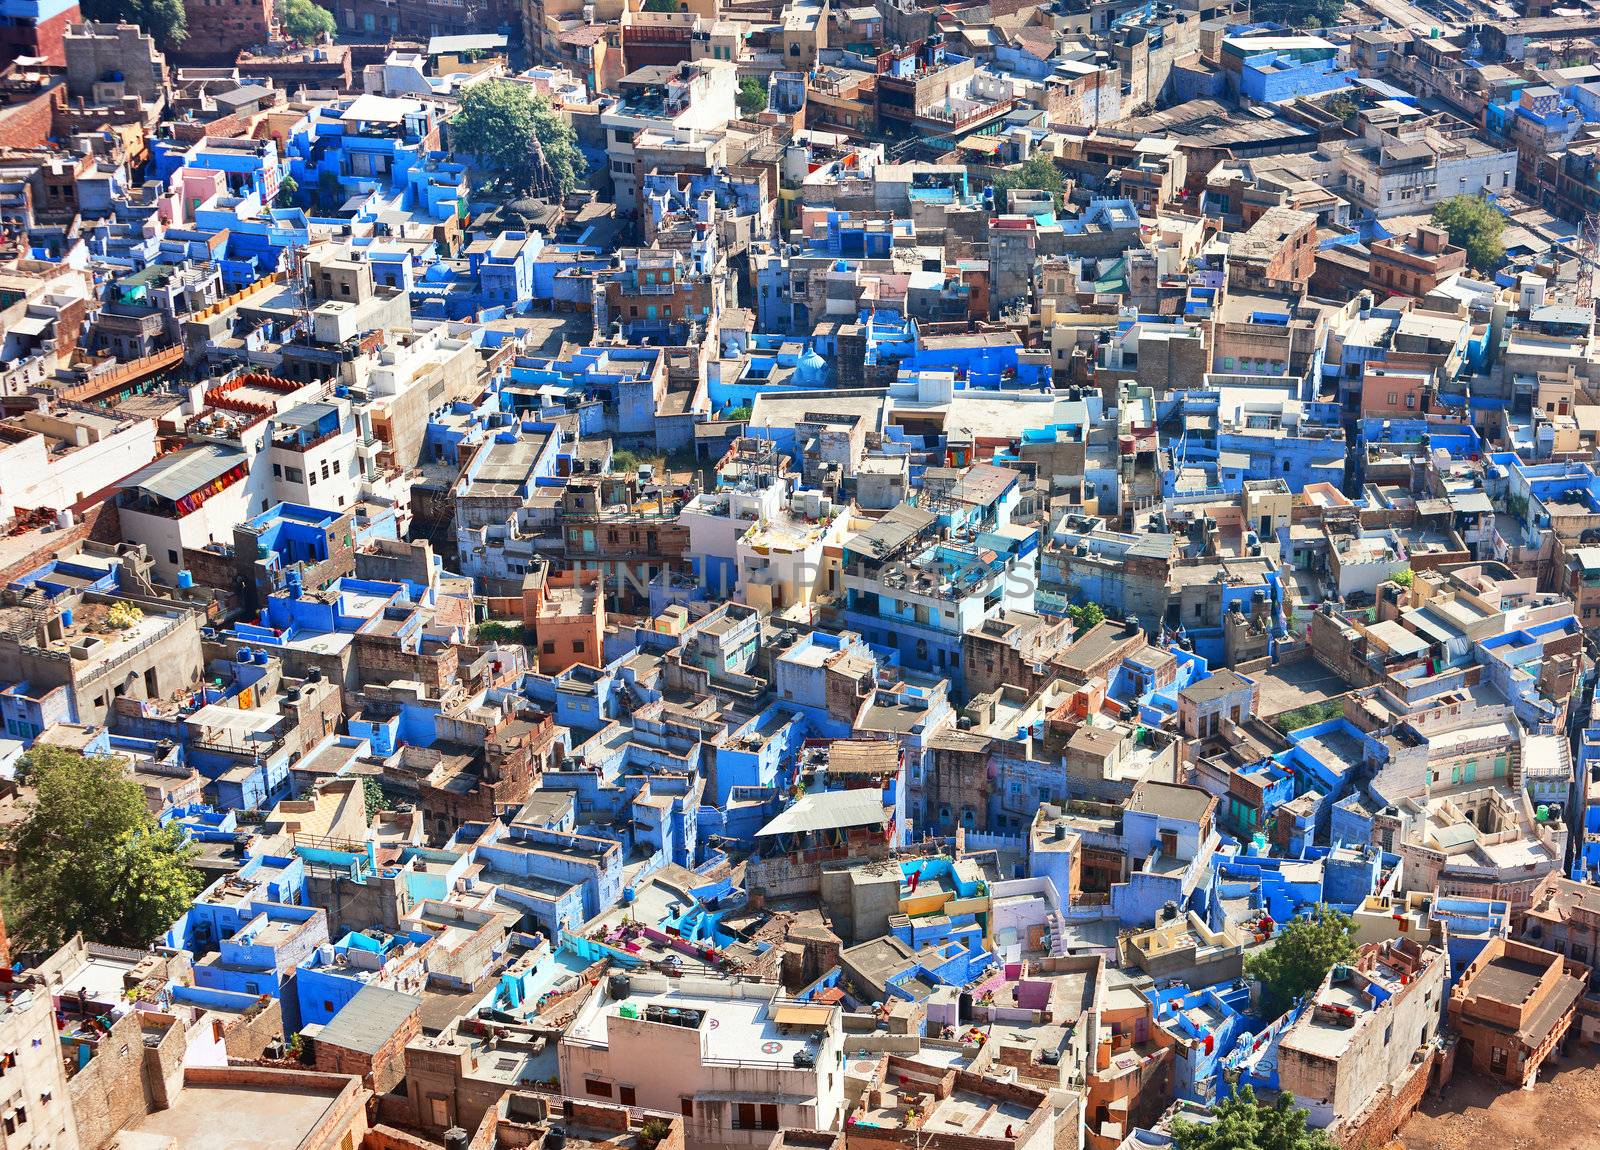 A view of Jodhpur, the Blue City of Rajasthan, India
